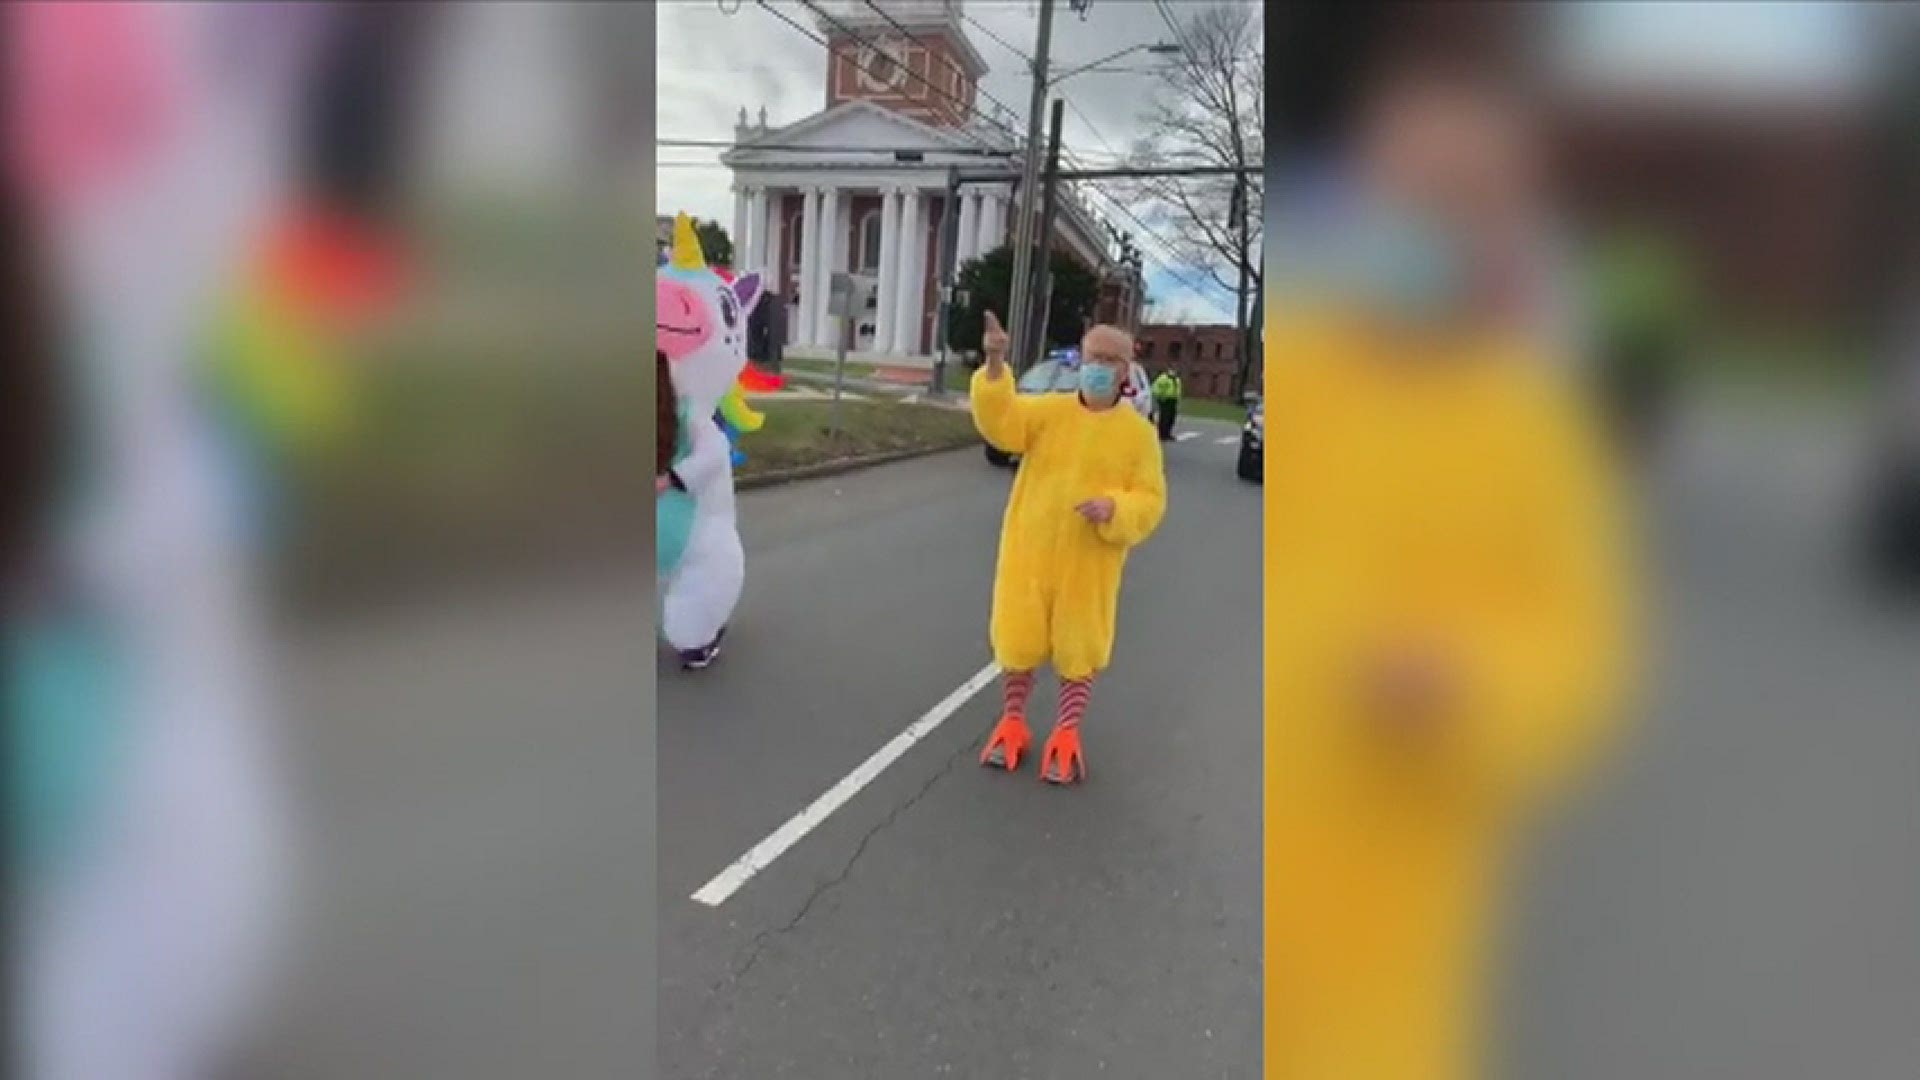 Mayor races in chicken costume against unicorn for a good cause